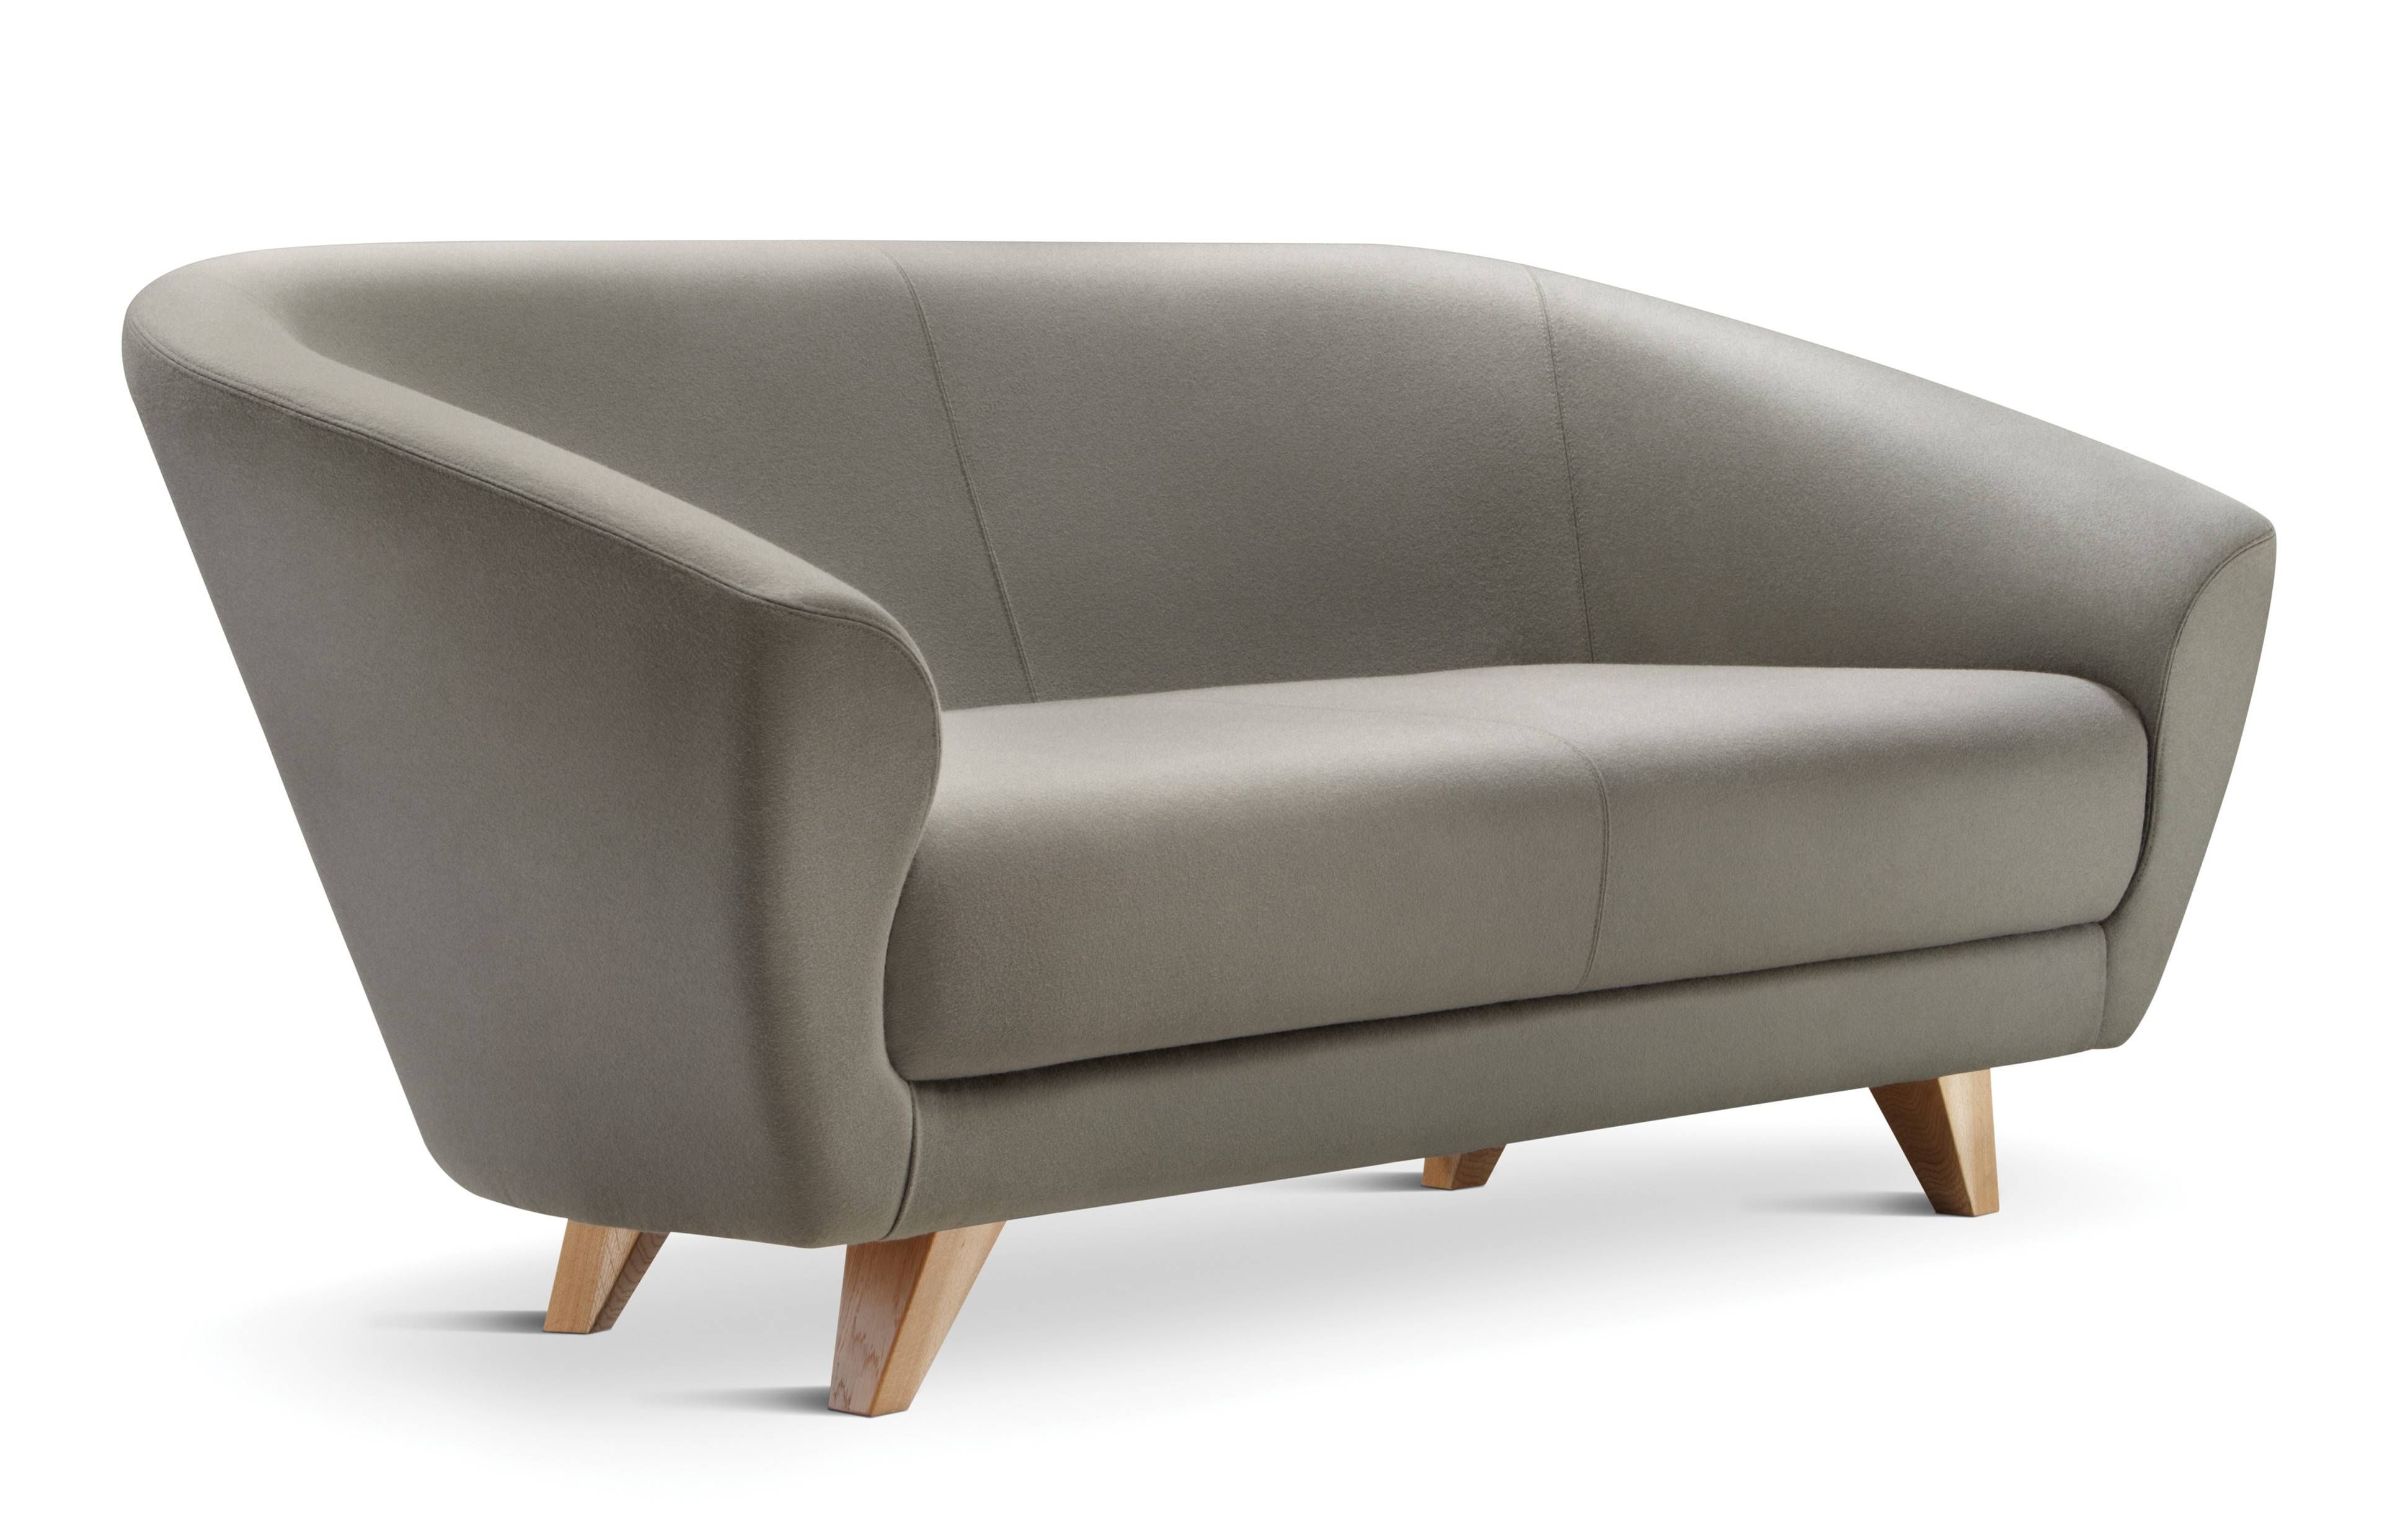 Mortimer – 3 Seat Sofa With Solid Wood Legs Within Wood Legs Sofas (View 9 of 30)